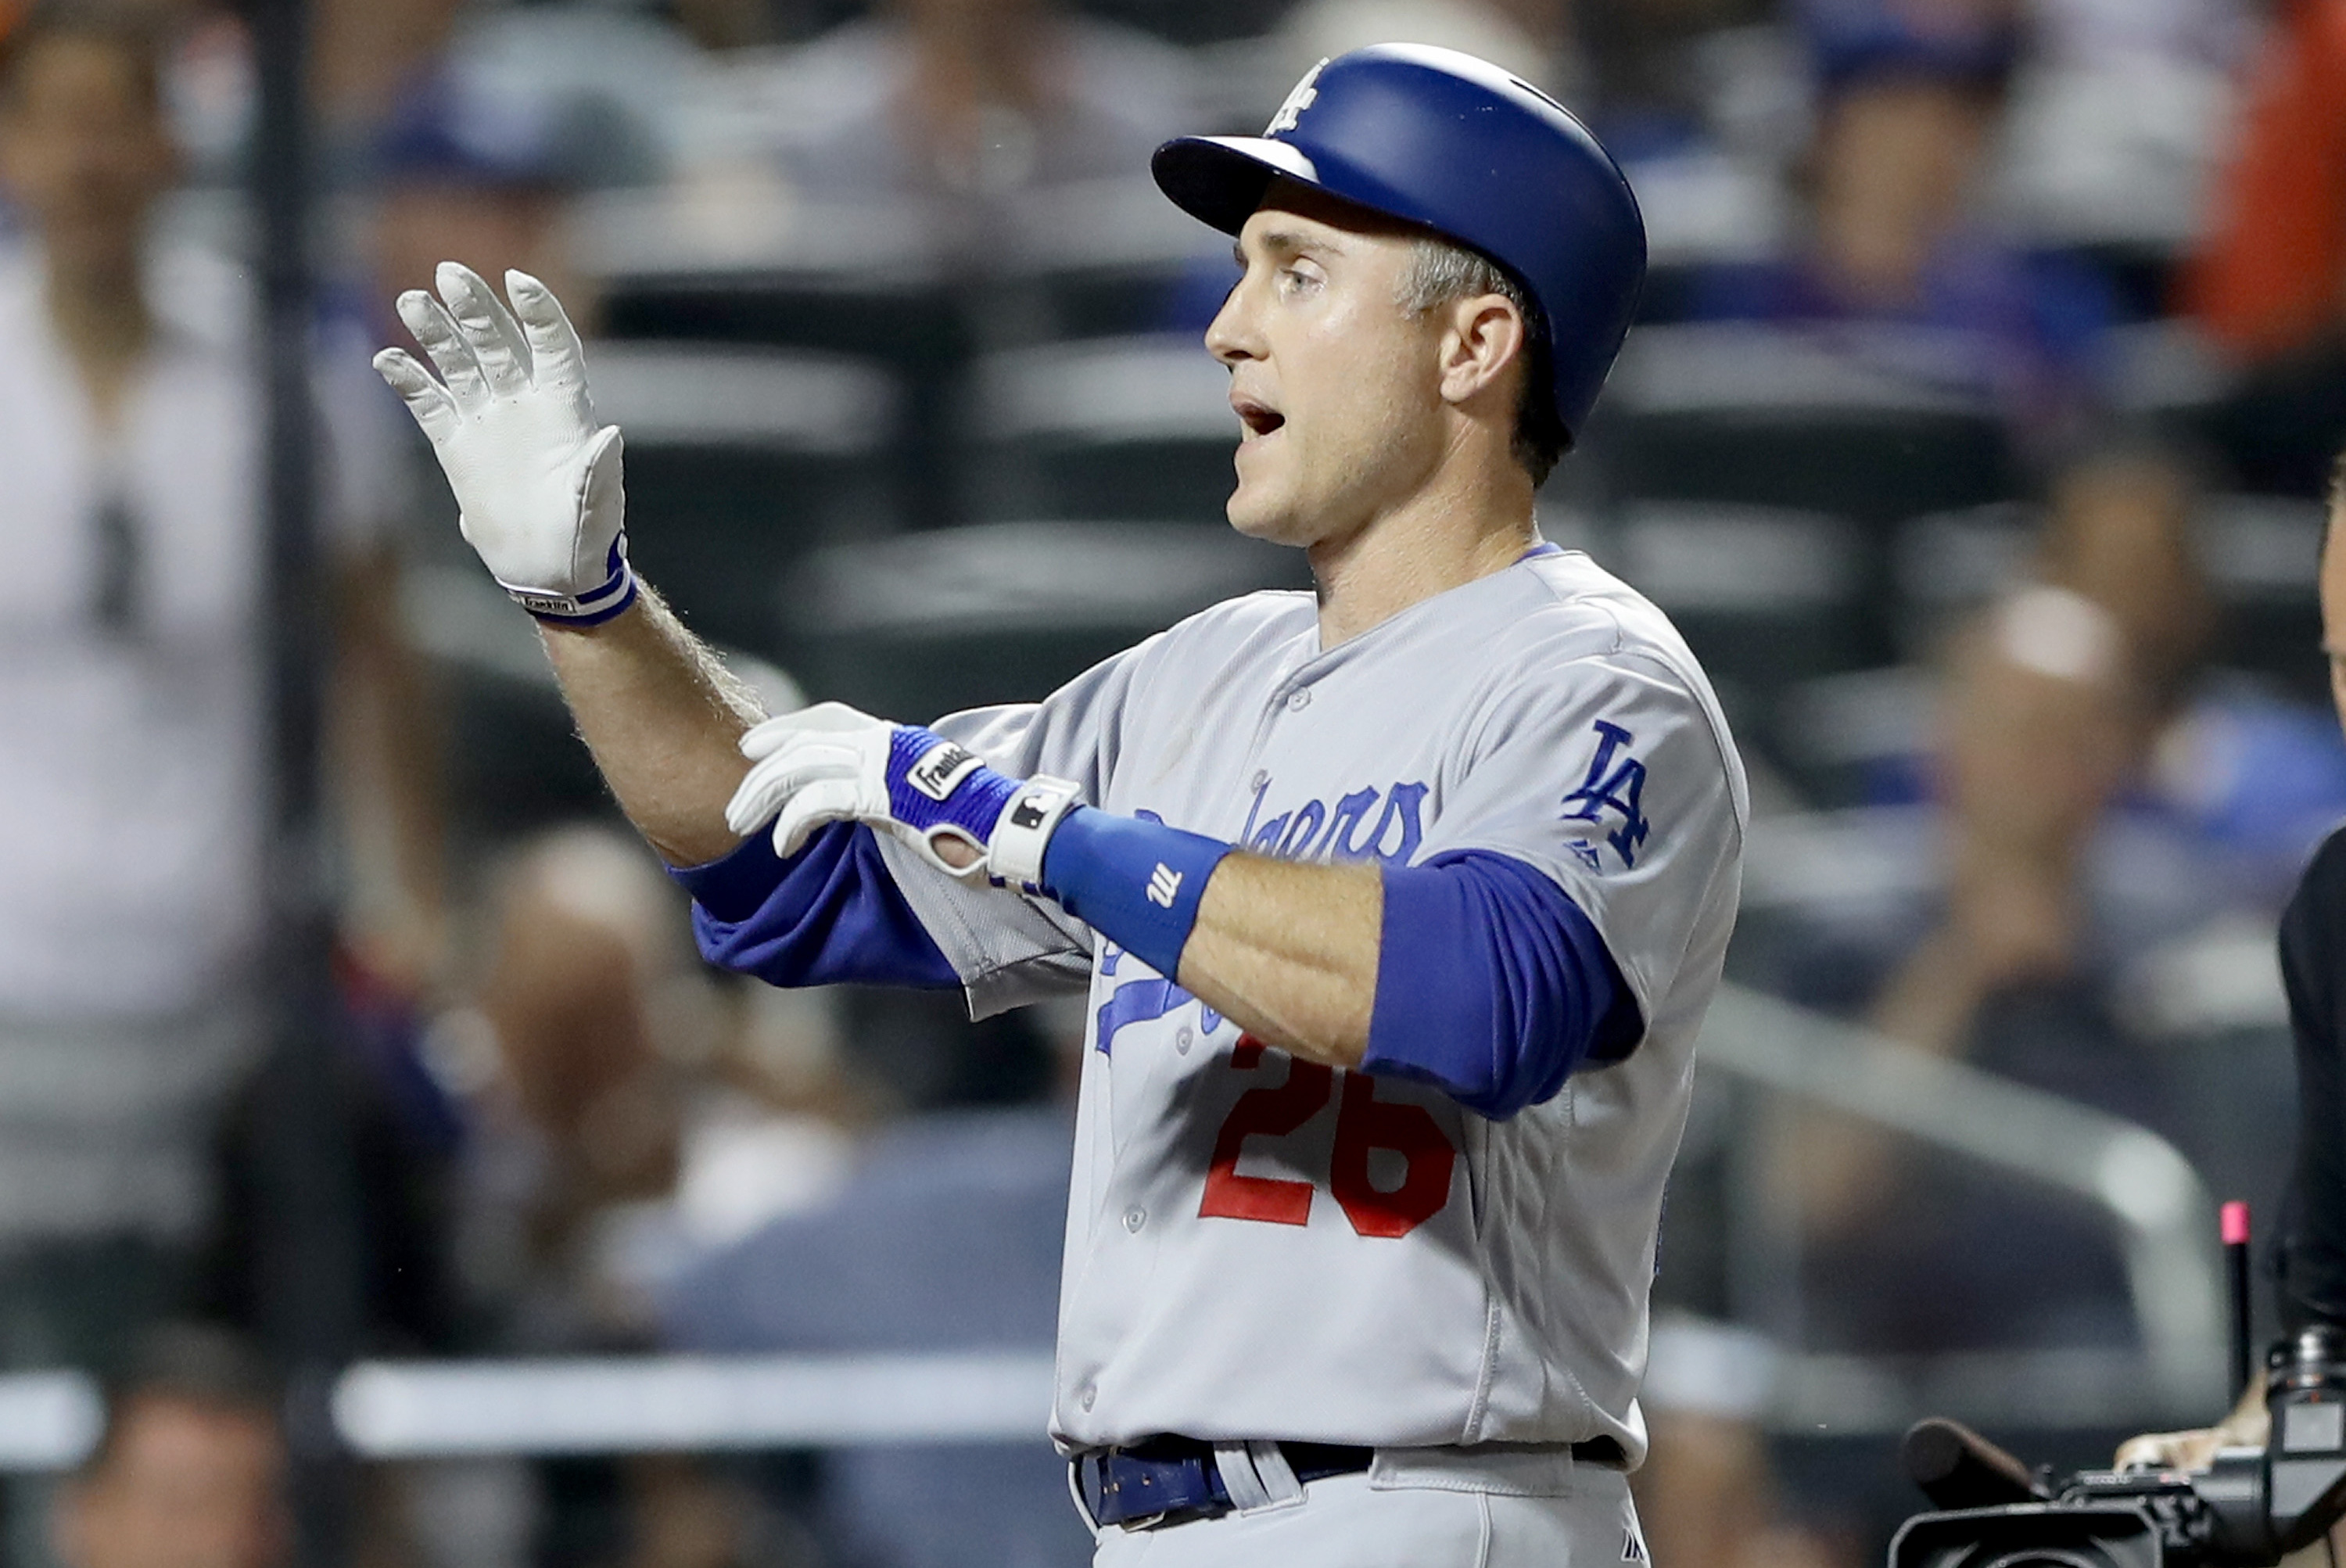 Bye, Chase! Mets villain Utley released by Dodgers to facilitate